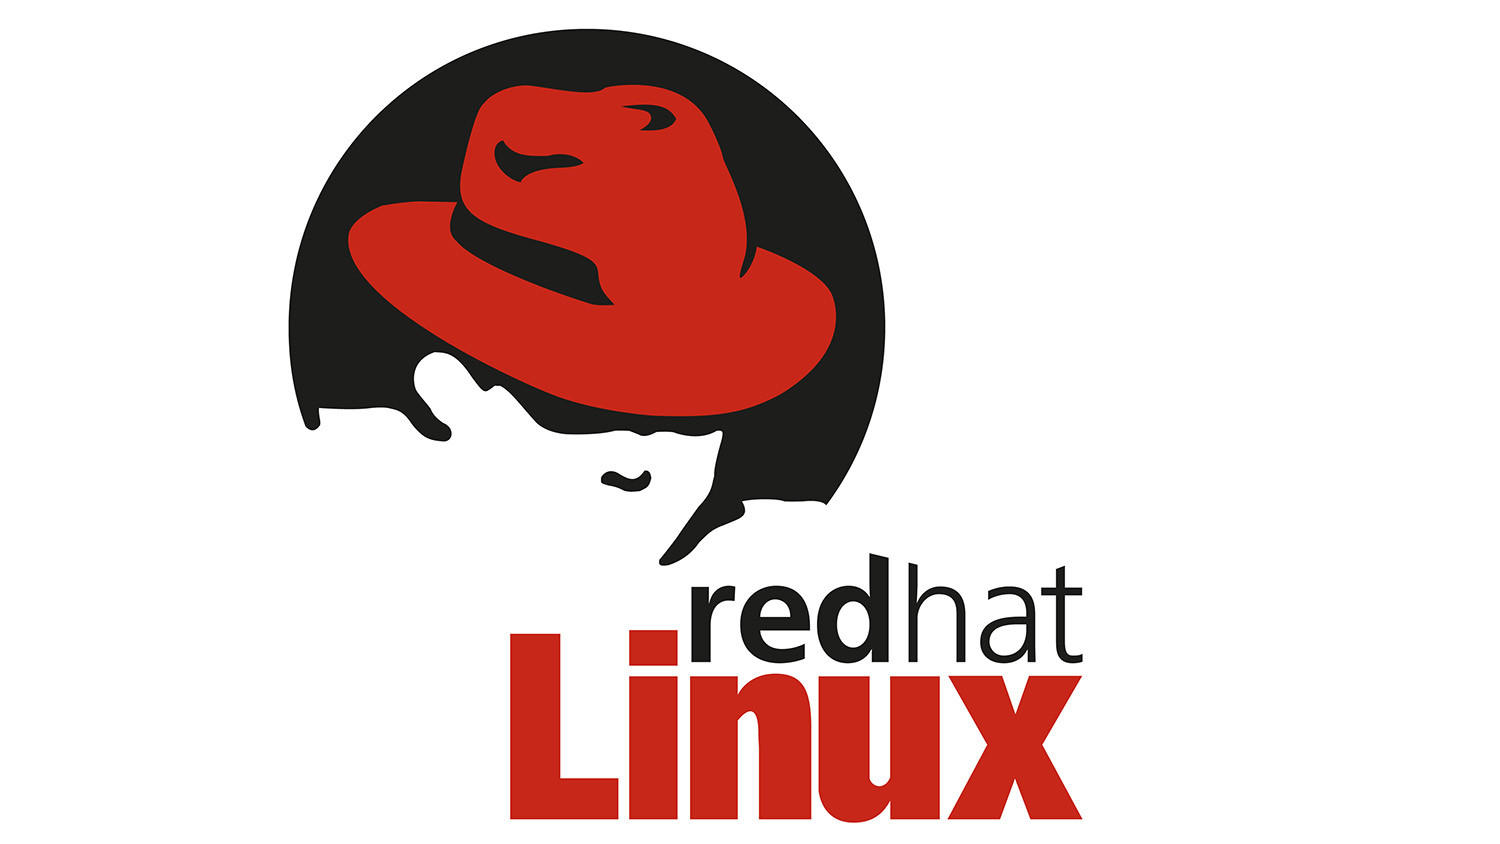 Ред хат. Ред хат линукс. Значок Red hat. Red hat Enterprise. Red hat Enterprise Linux.